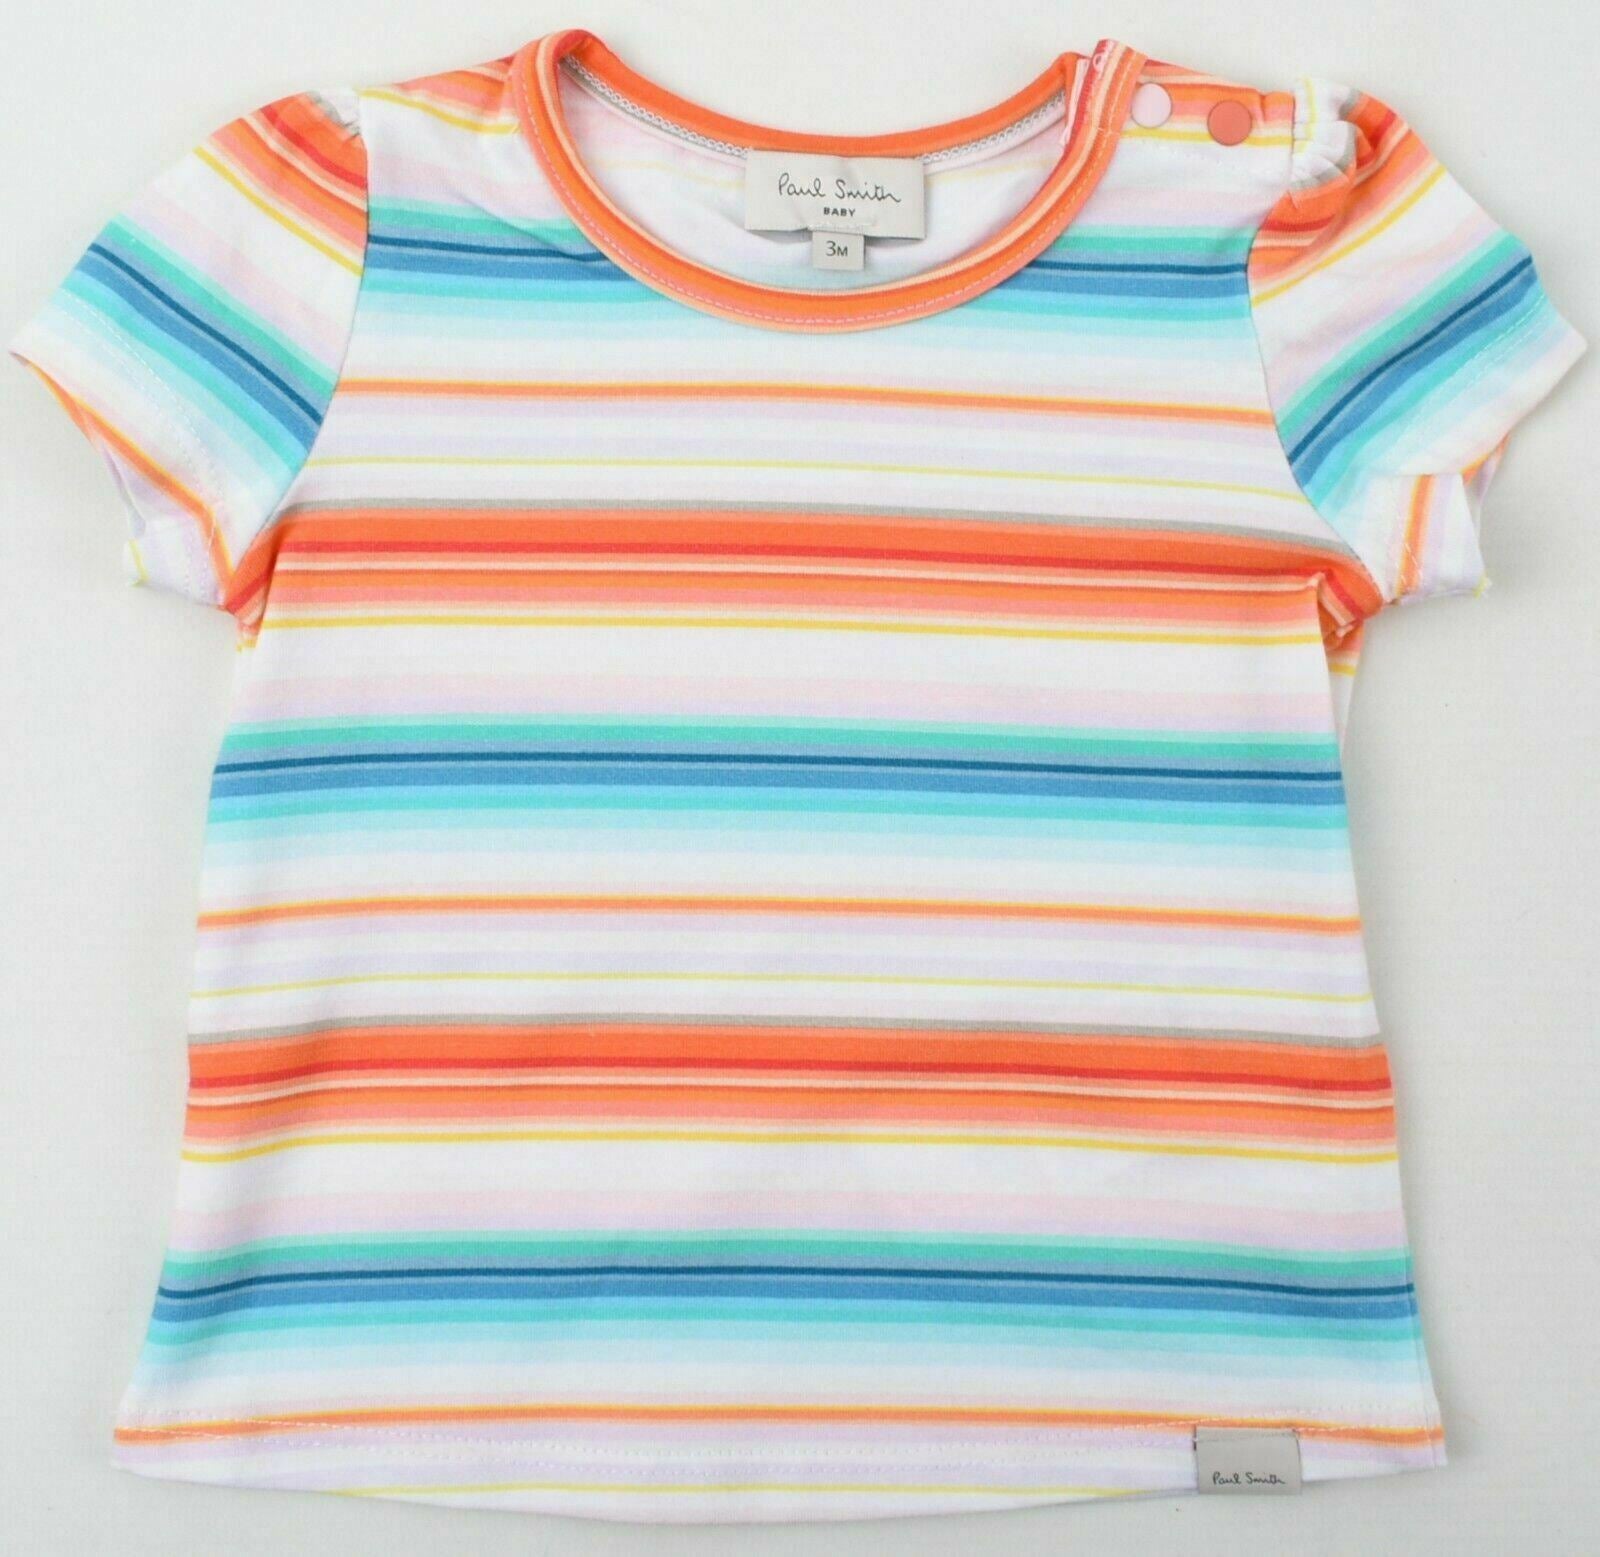 PAUL SMITH Baby Girls' Striped T-shirt Top, Multicoloured, size 3 months